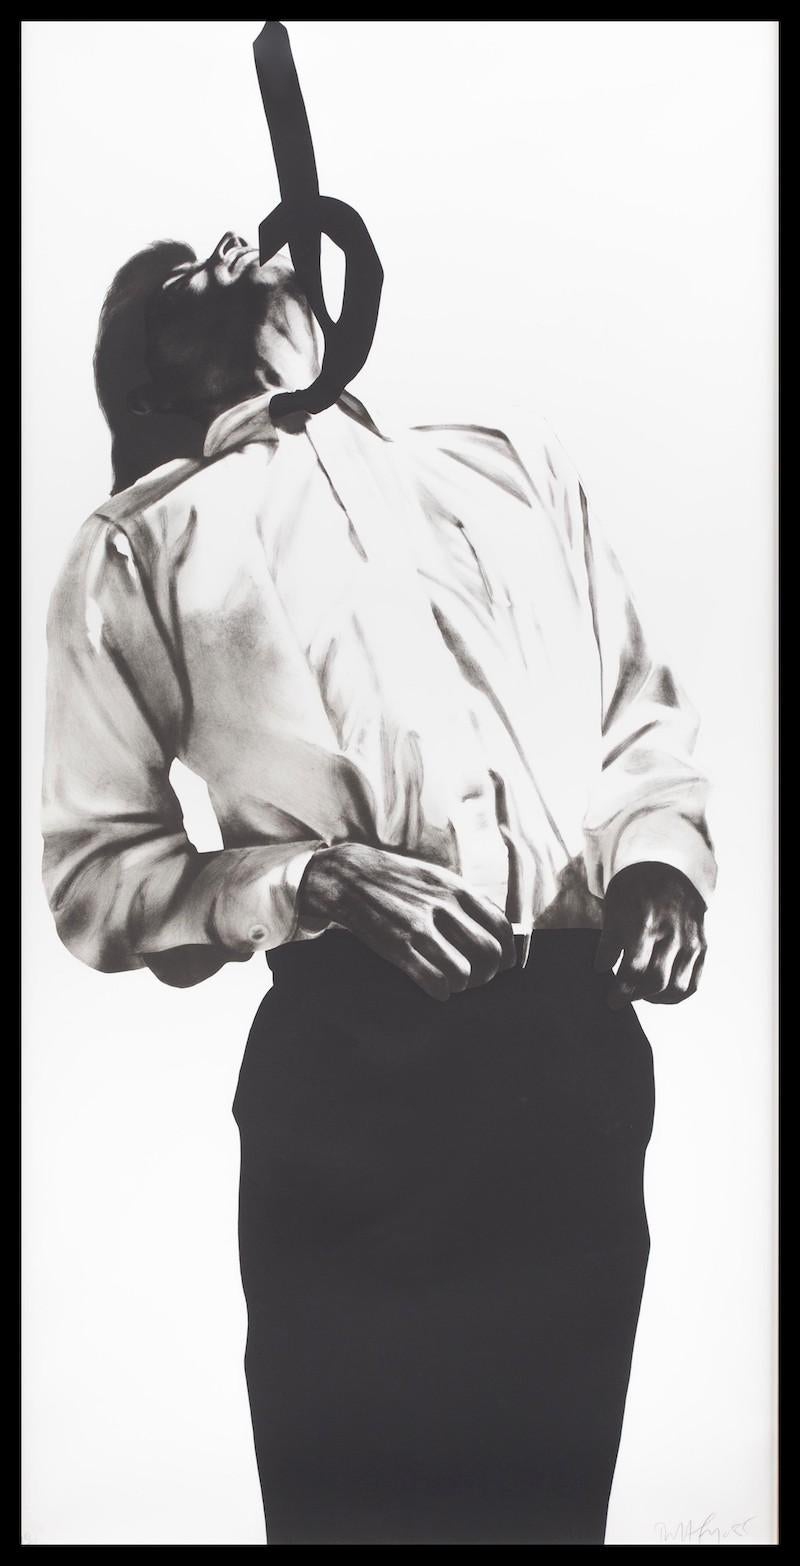 From the artist’s iconic, Men in the Cities series, Robert Longo created Eric in 1985 as an original lithograph measuring 71 1/2 x 38 1/2 in. (182 x 98 cm), unframed.  The artwork is hand-signed, dated and numbered in pencil, from the edition of 48